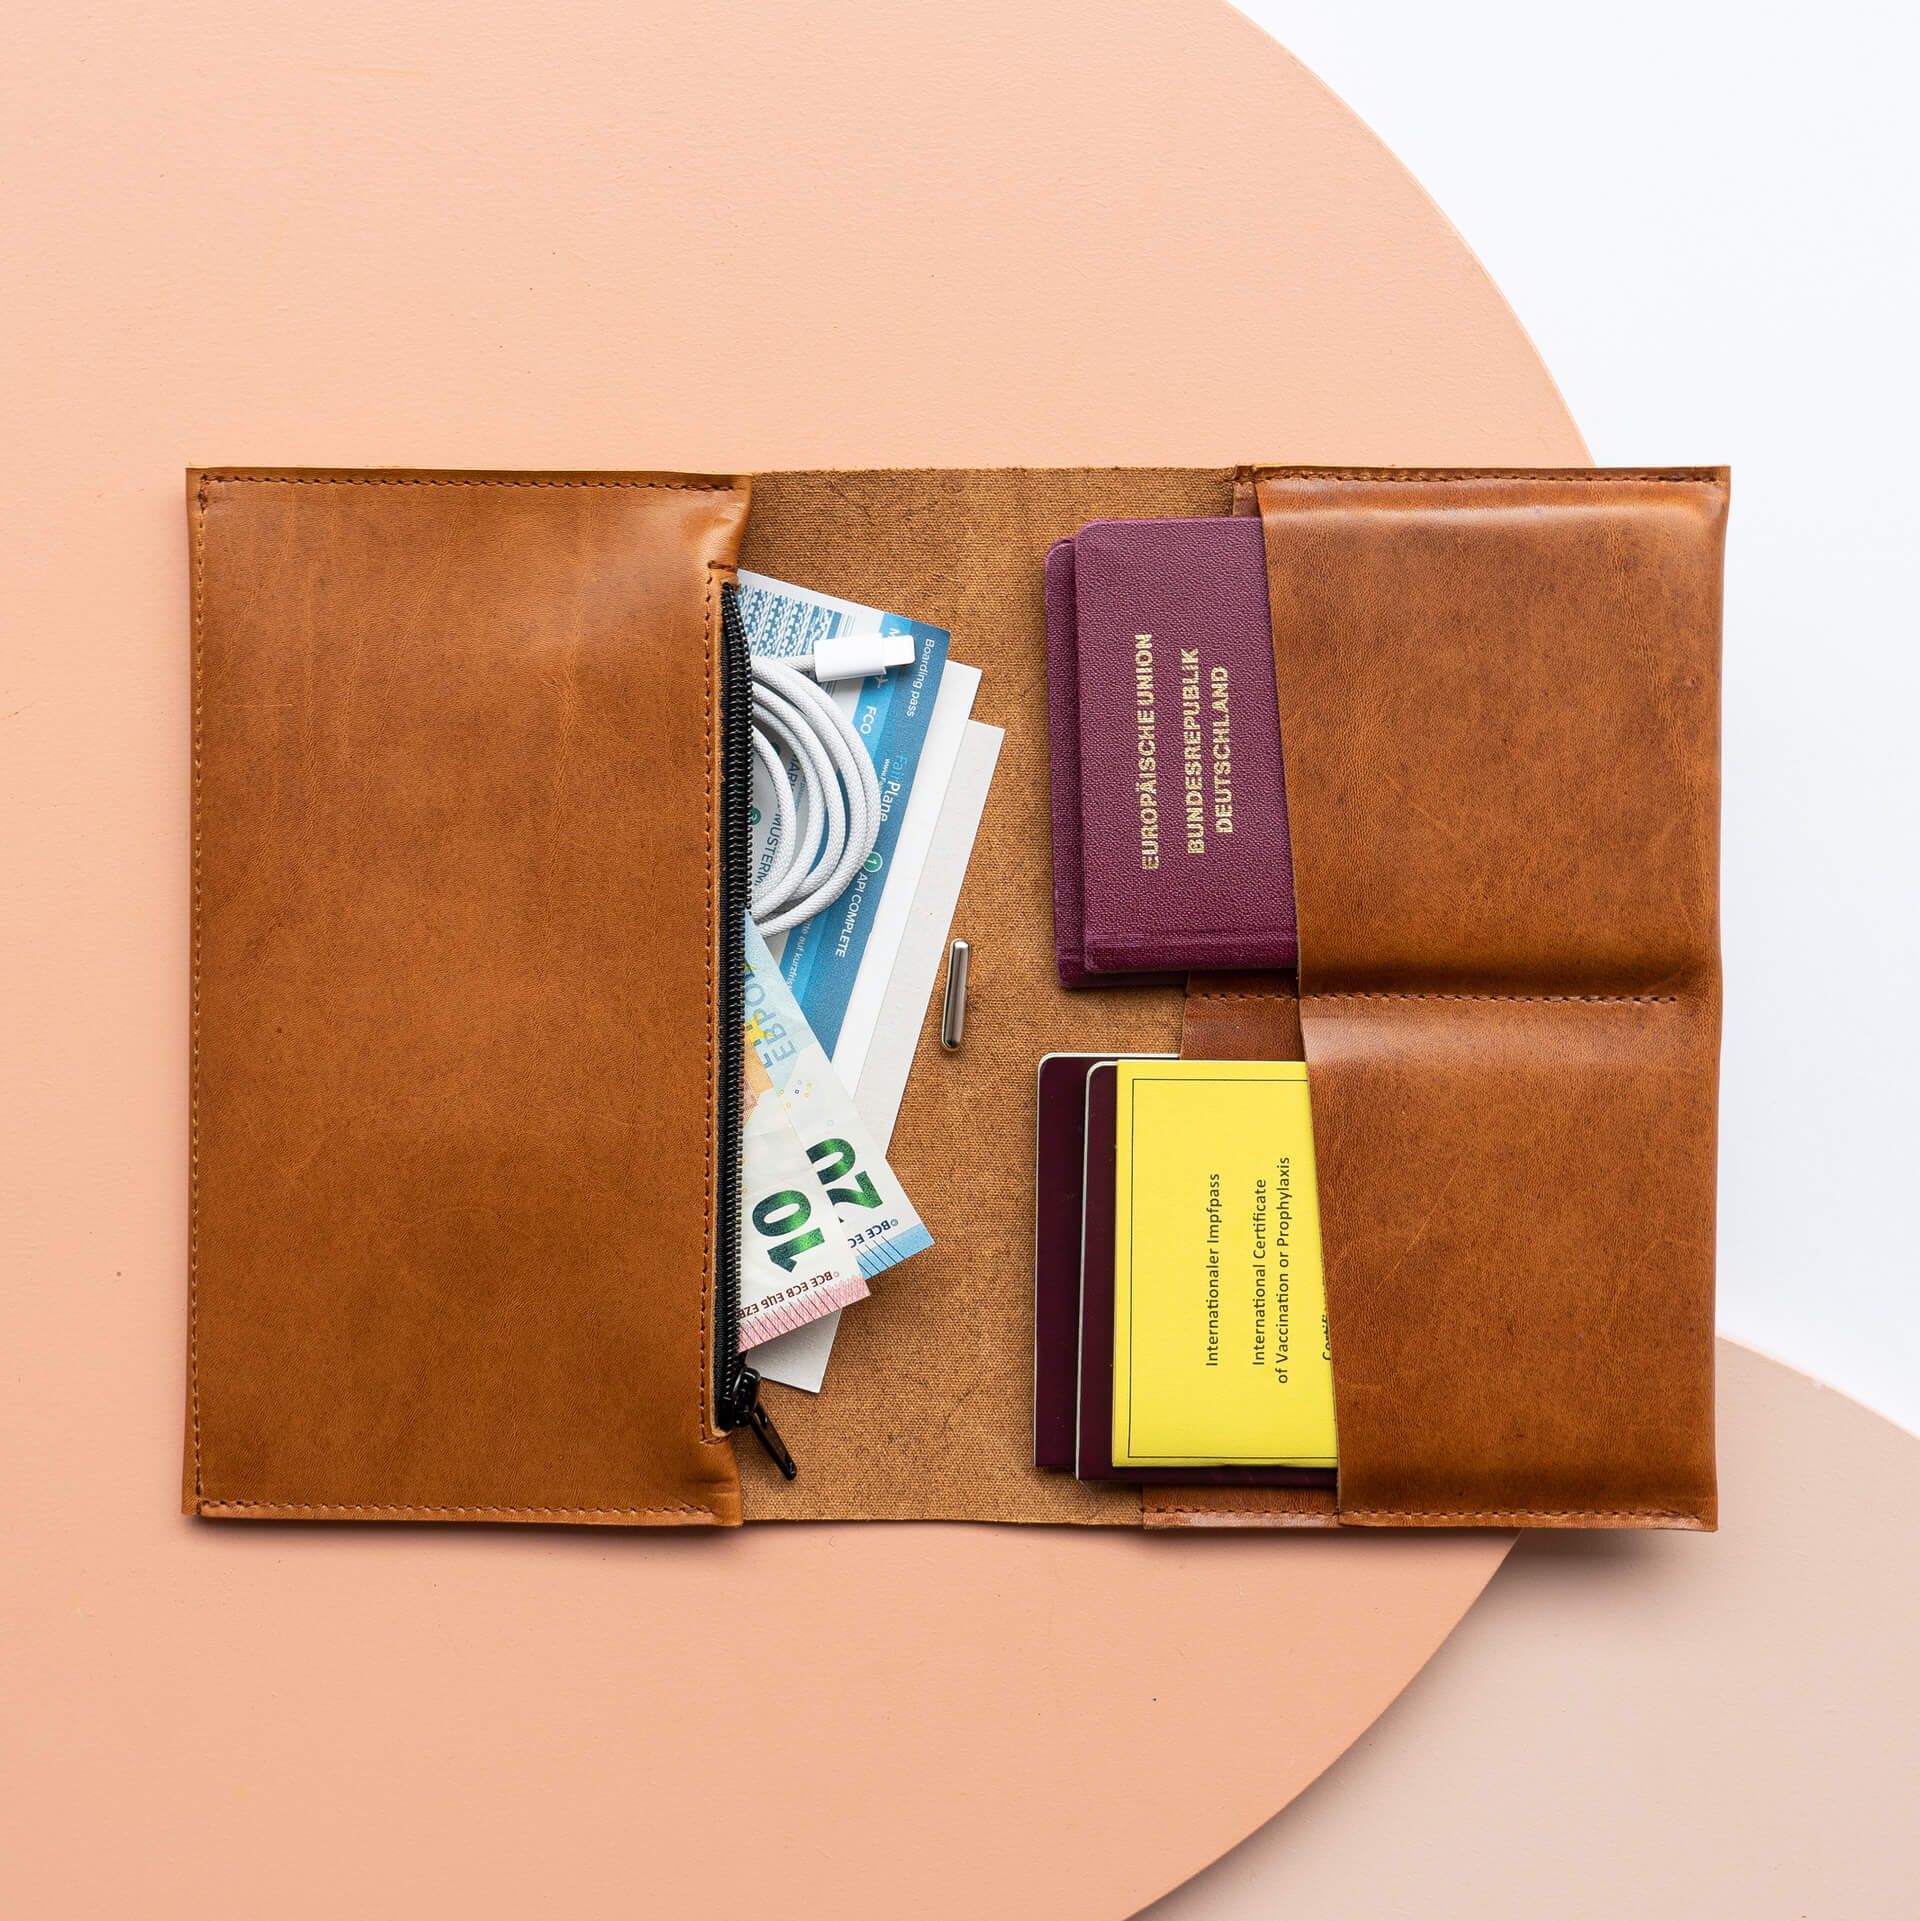 Our document case has space for up to four passports, vaccination cards, EC and business cards as well as A5 size documents, a smartphone, charging cable, SIM and SD card and cash.